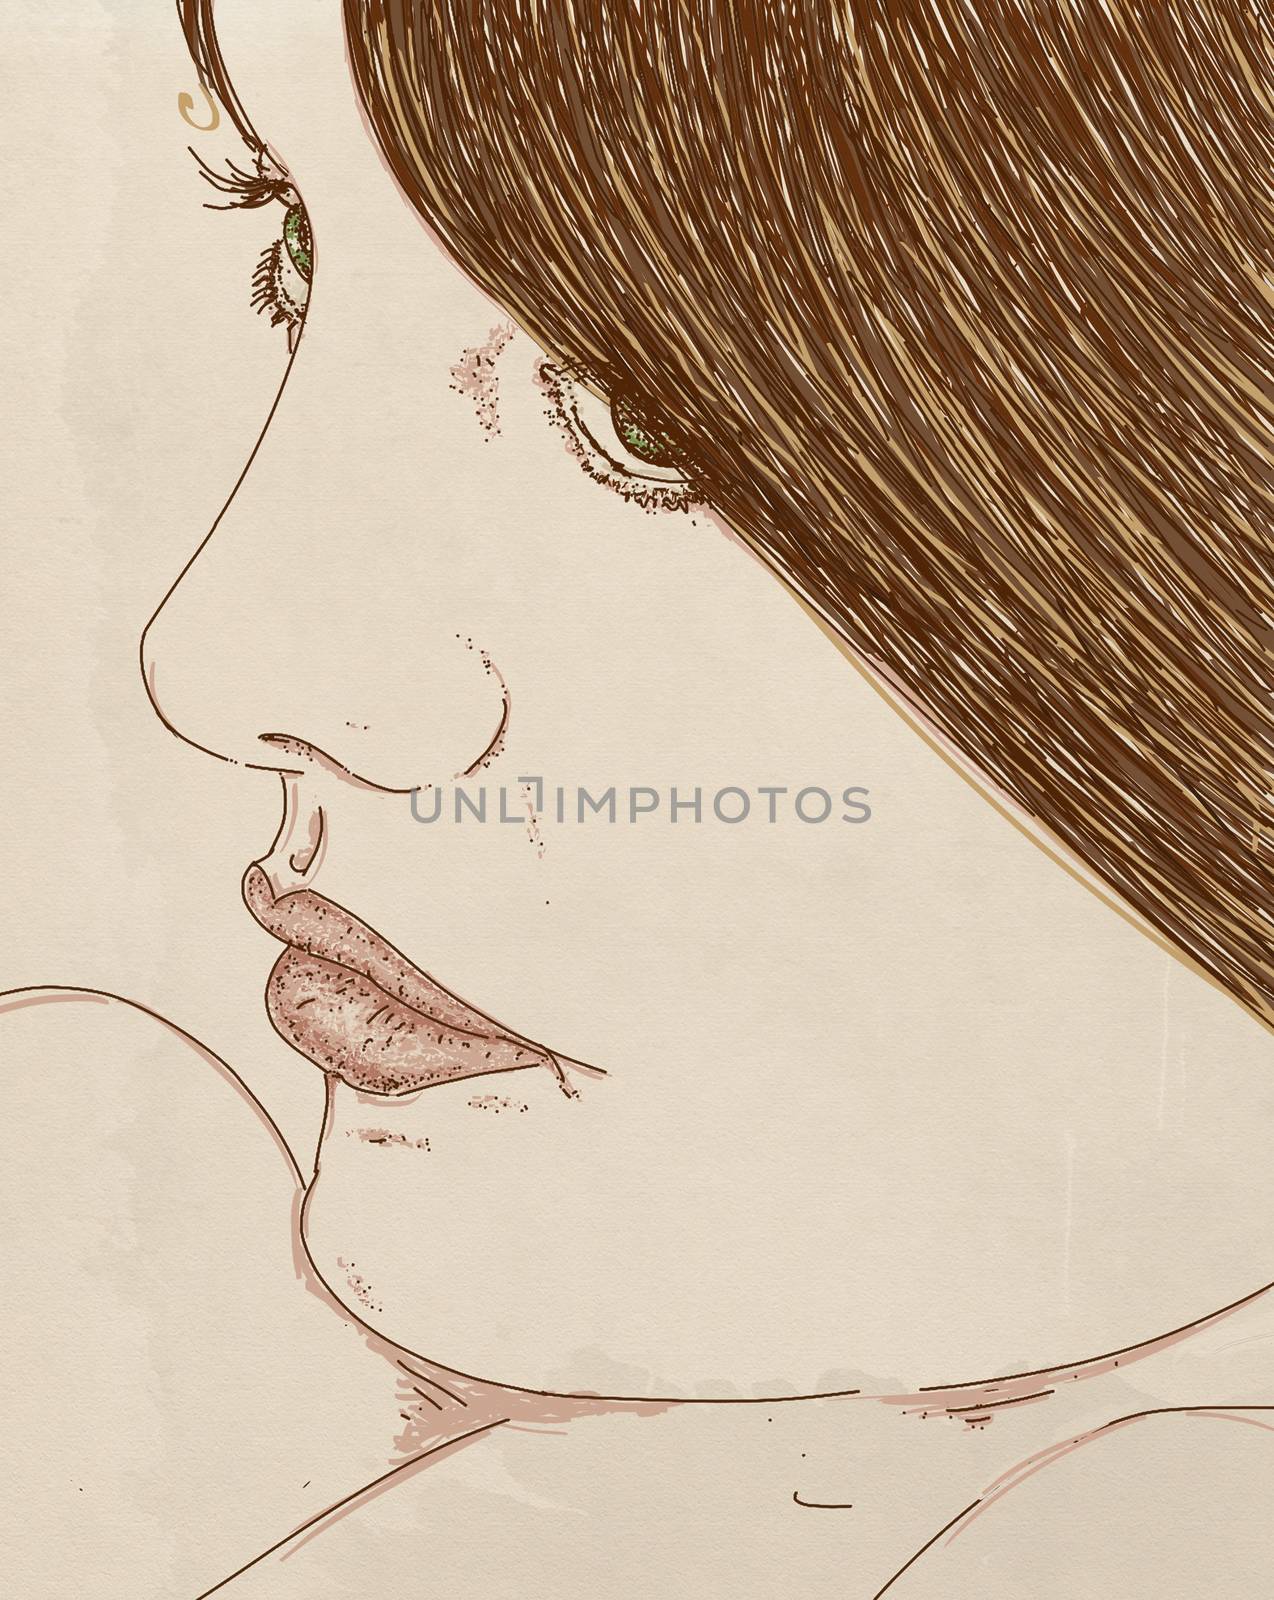 A woman's face, with particulars of lips and eyes, designed for cosmetics by silviagaudenzi